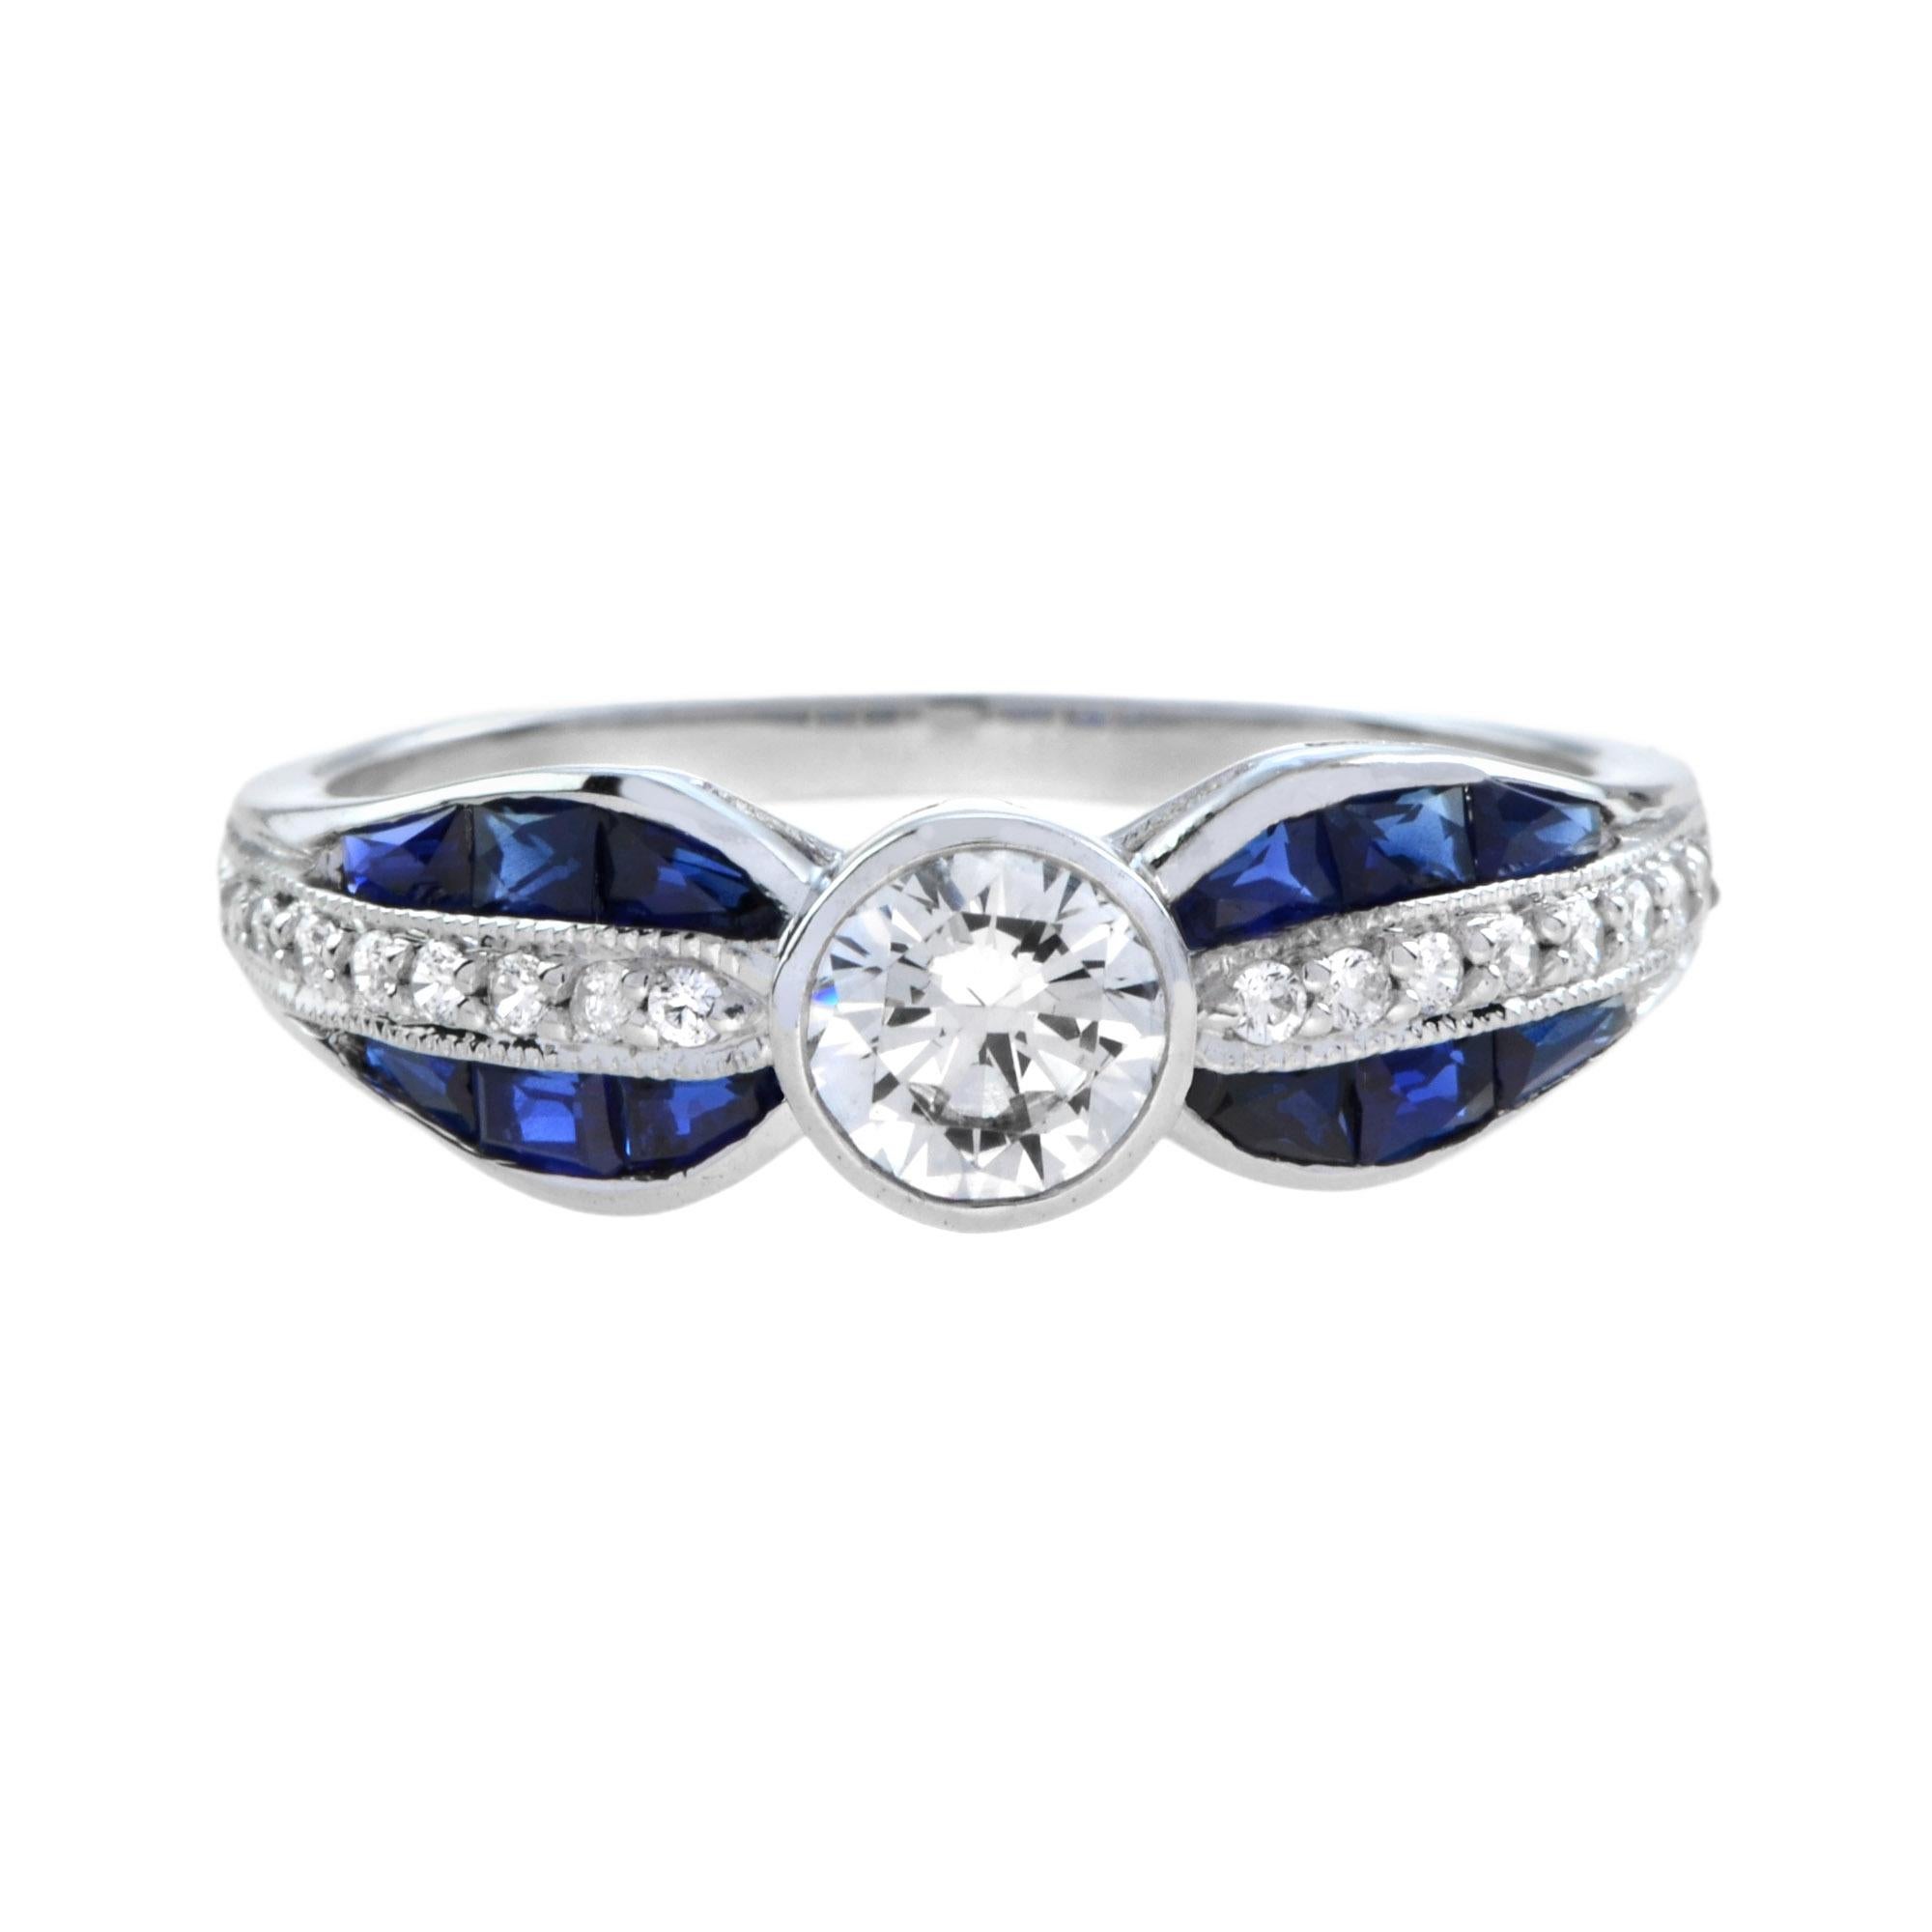 For Sale:  Diamond and Sapphire Art Deco Style Solitaire Ring in 18K White Gold 3